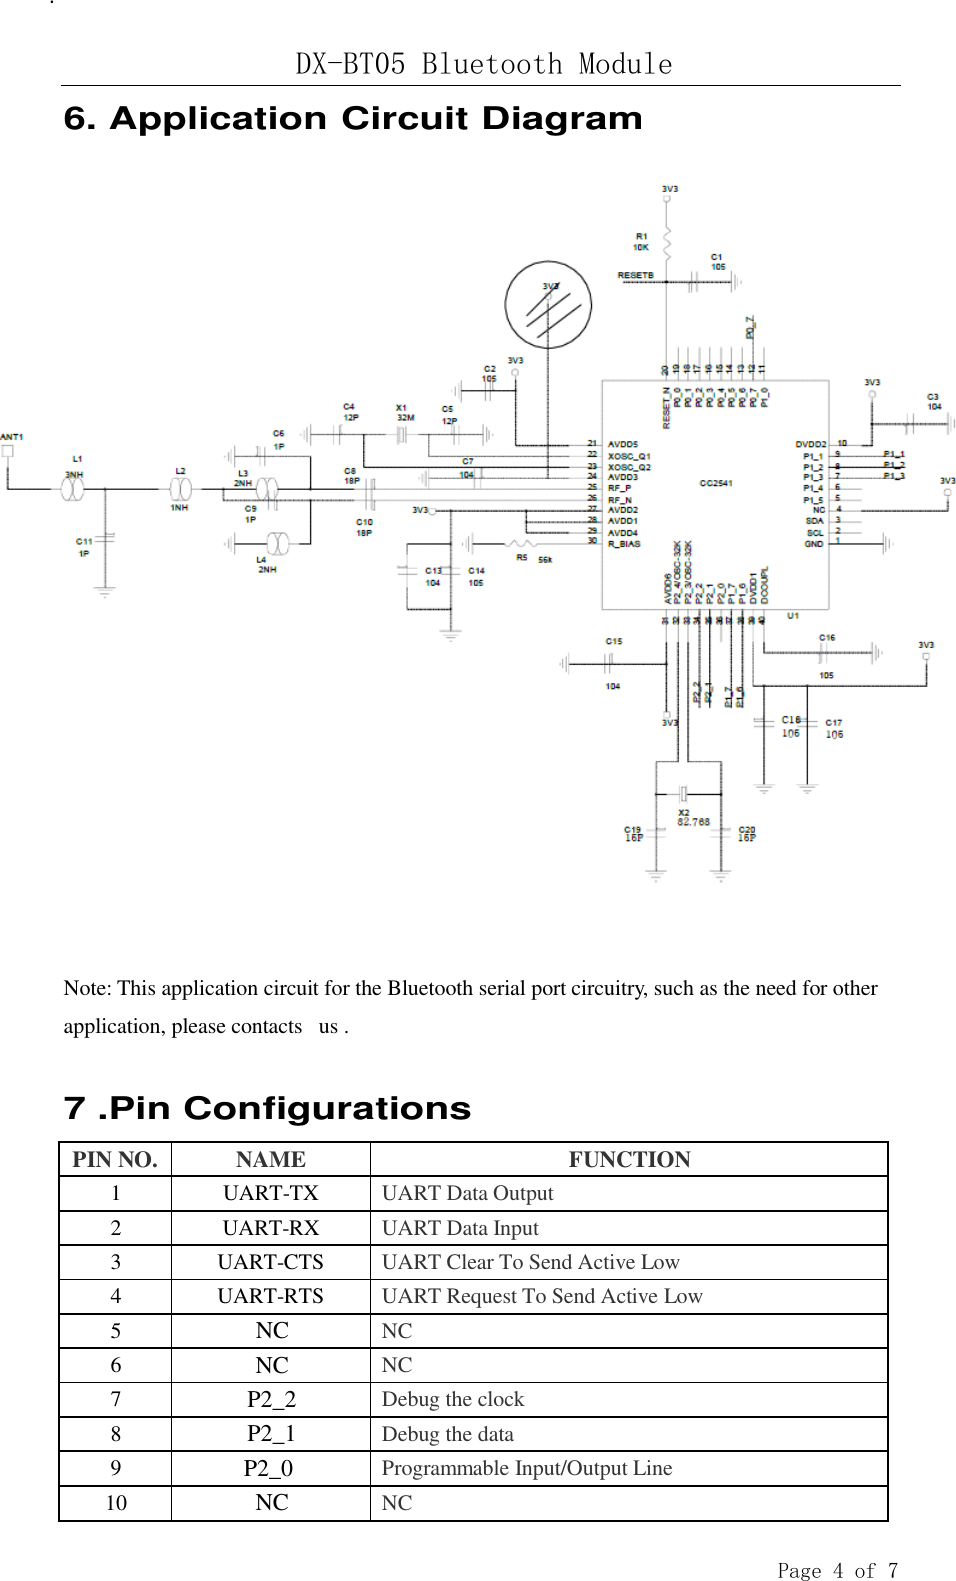 DX-BT05 Bluetooth Module  Page 4 of 7 .   6. Application Circuit Diagram   Note: This application circuit for the Bluetooth serial port circuitry, such as the need for other application, please contacts   us .   7 .Pin Configurations  PIN NO. NAME FUNCTION 1 UART-TX UART Data Output 2 UART-RX UART Data Input 3 UART-CTS UART Clear To Send Active Low 4 UART-RTS UART Request To Send Active Low 5 NC NC 6 NC NC 7 P2_2 Debug the clock 8 P2_1 Debug the data 9 P2_0 Programmable Input/Output Line 10 NC NC 